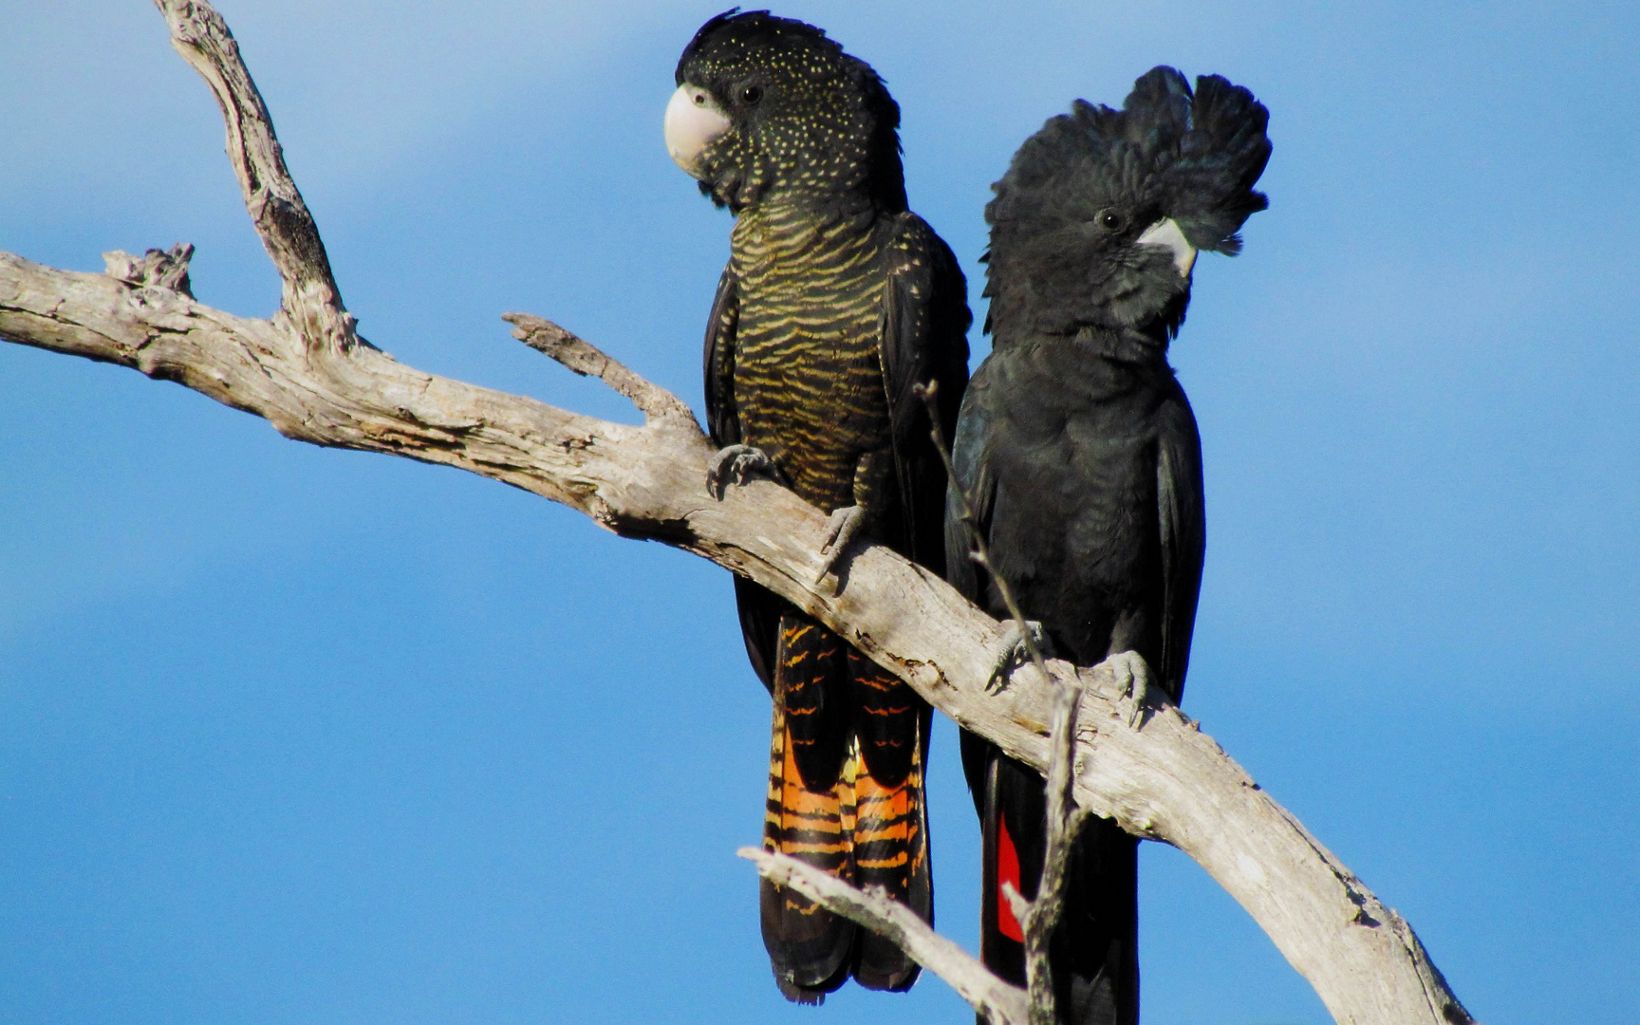 are large black cockatoos that are native to Australia.